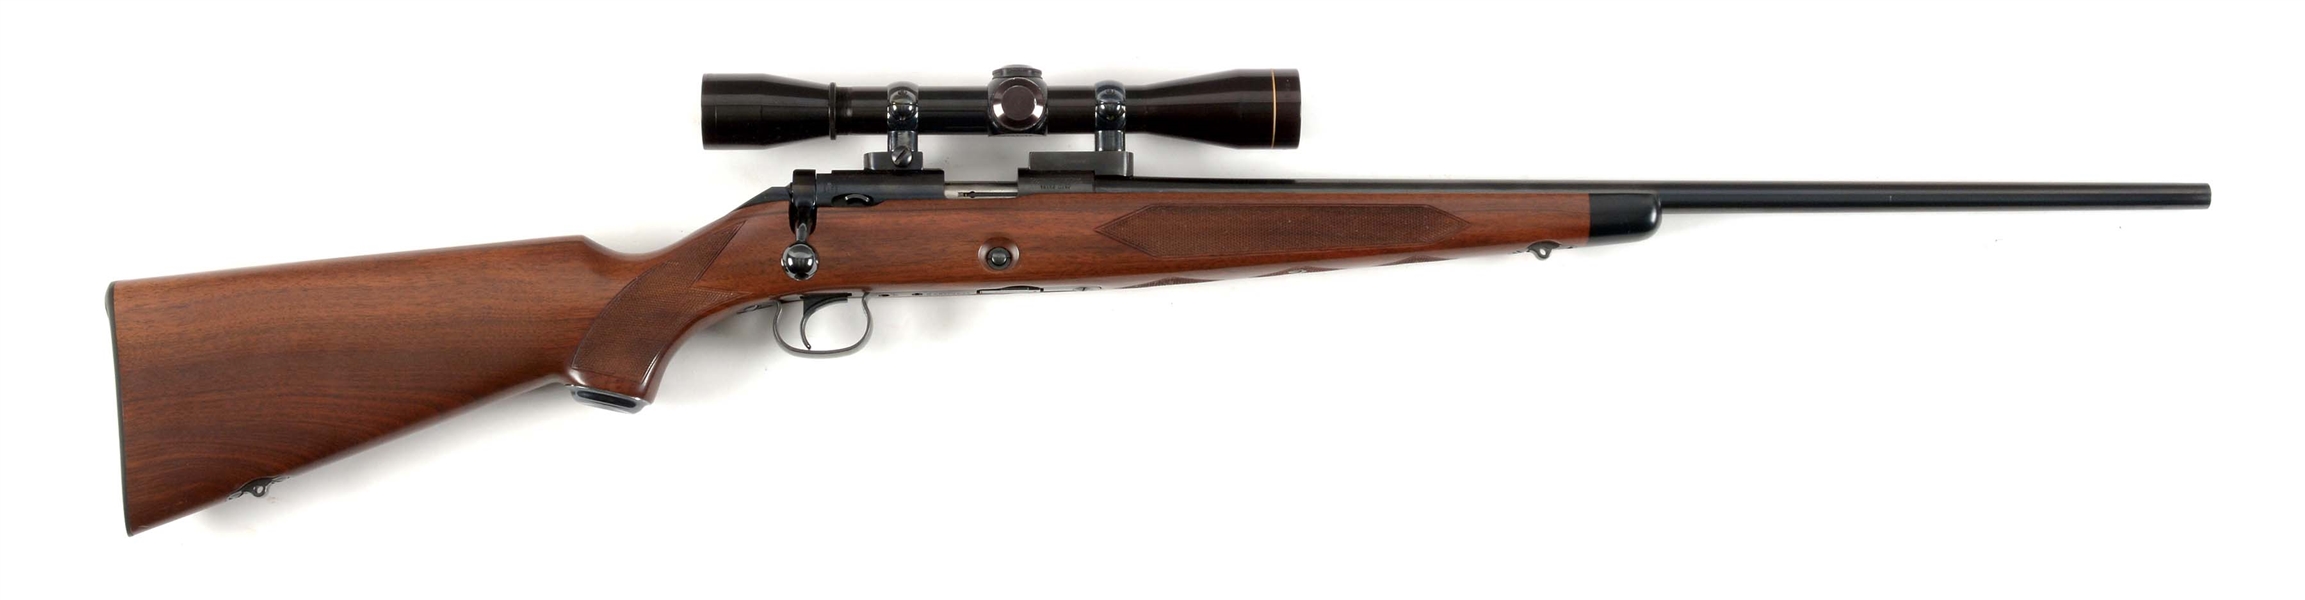 (C) WINCHESTER 52B BOLT ACTION .22 LR RIFLE WITH SCOPE.